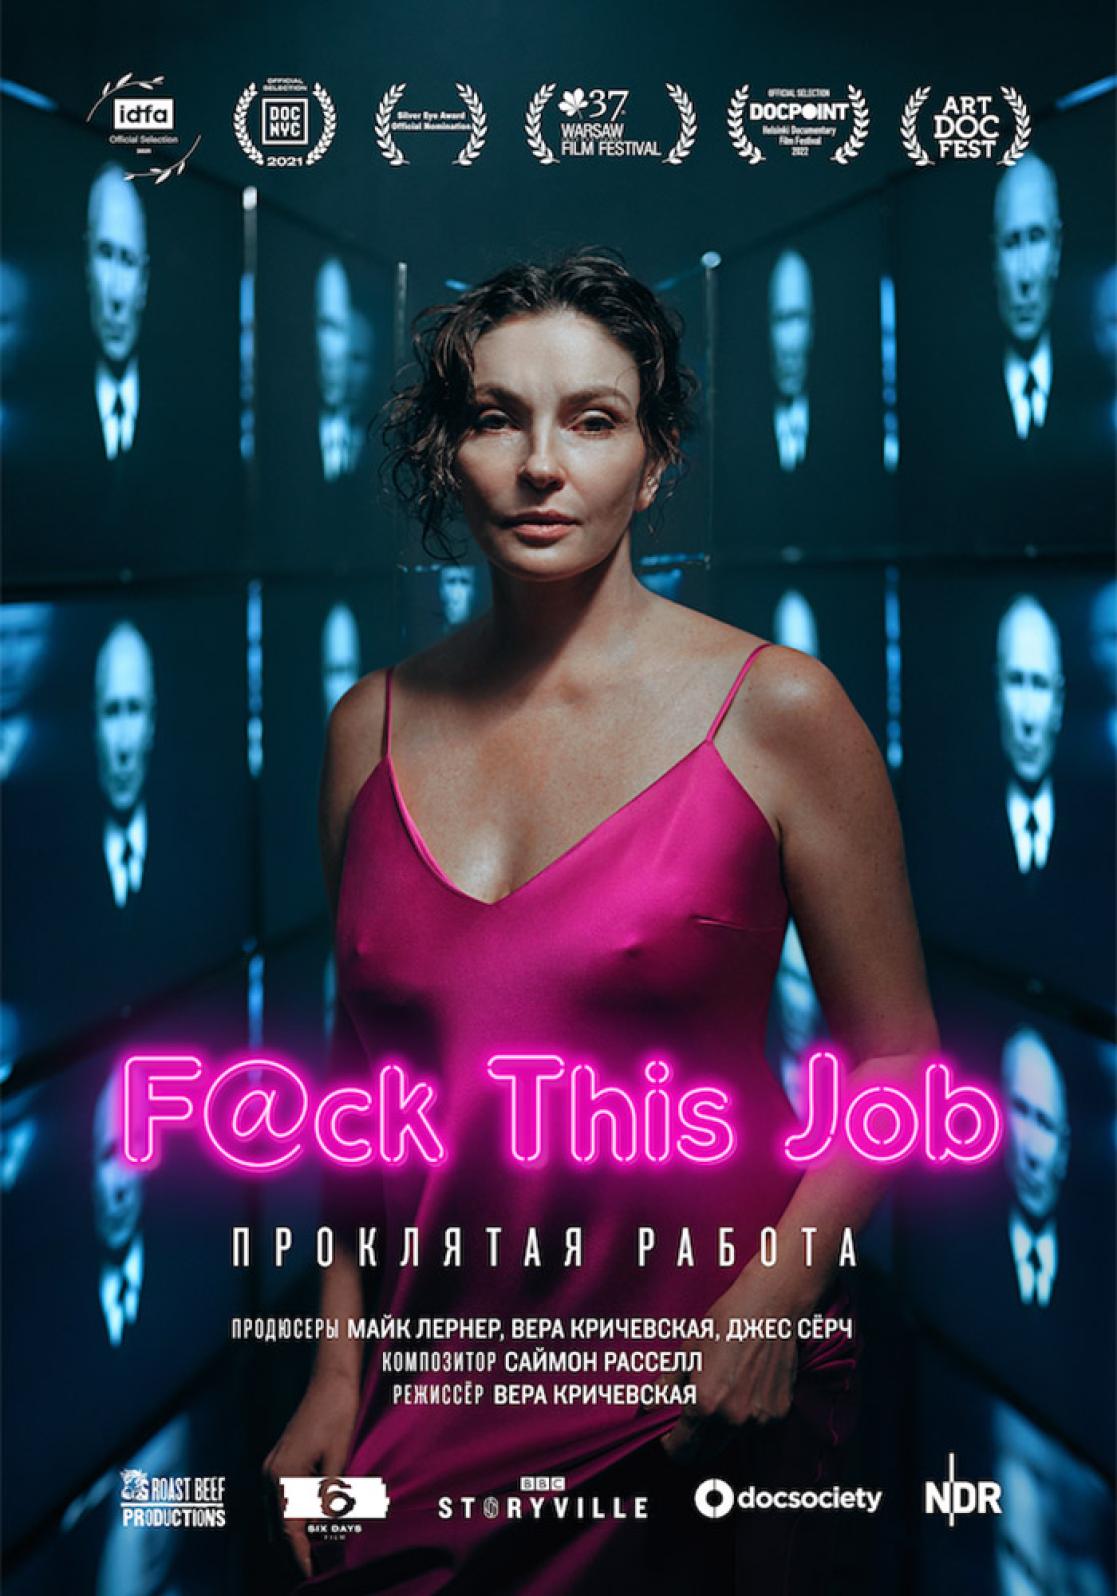 F@ck-This-Job-poster resized